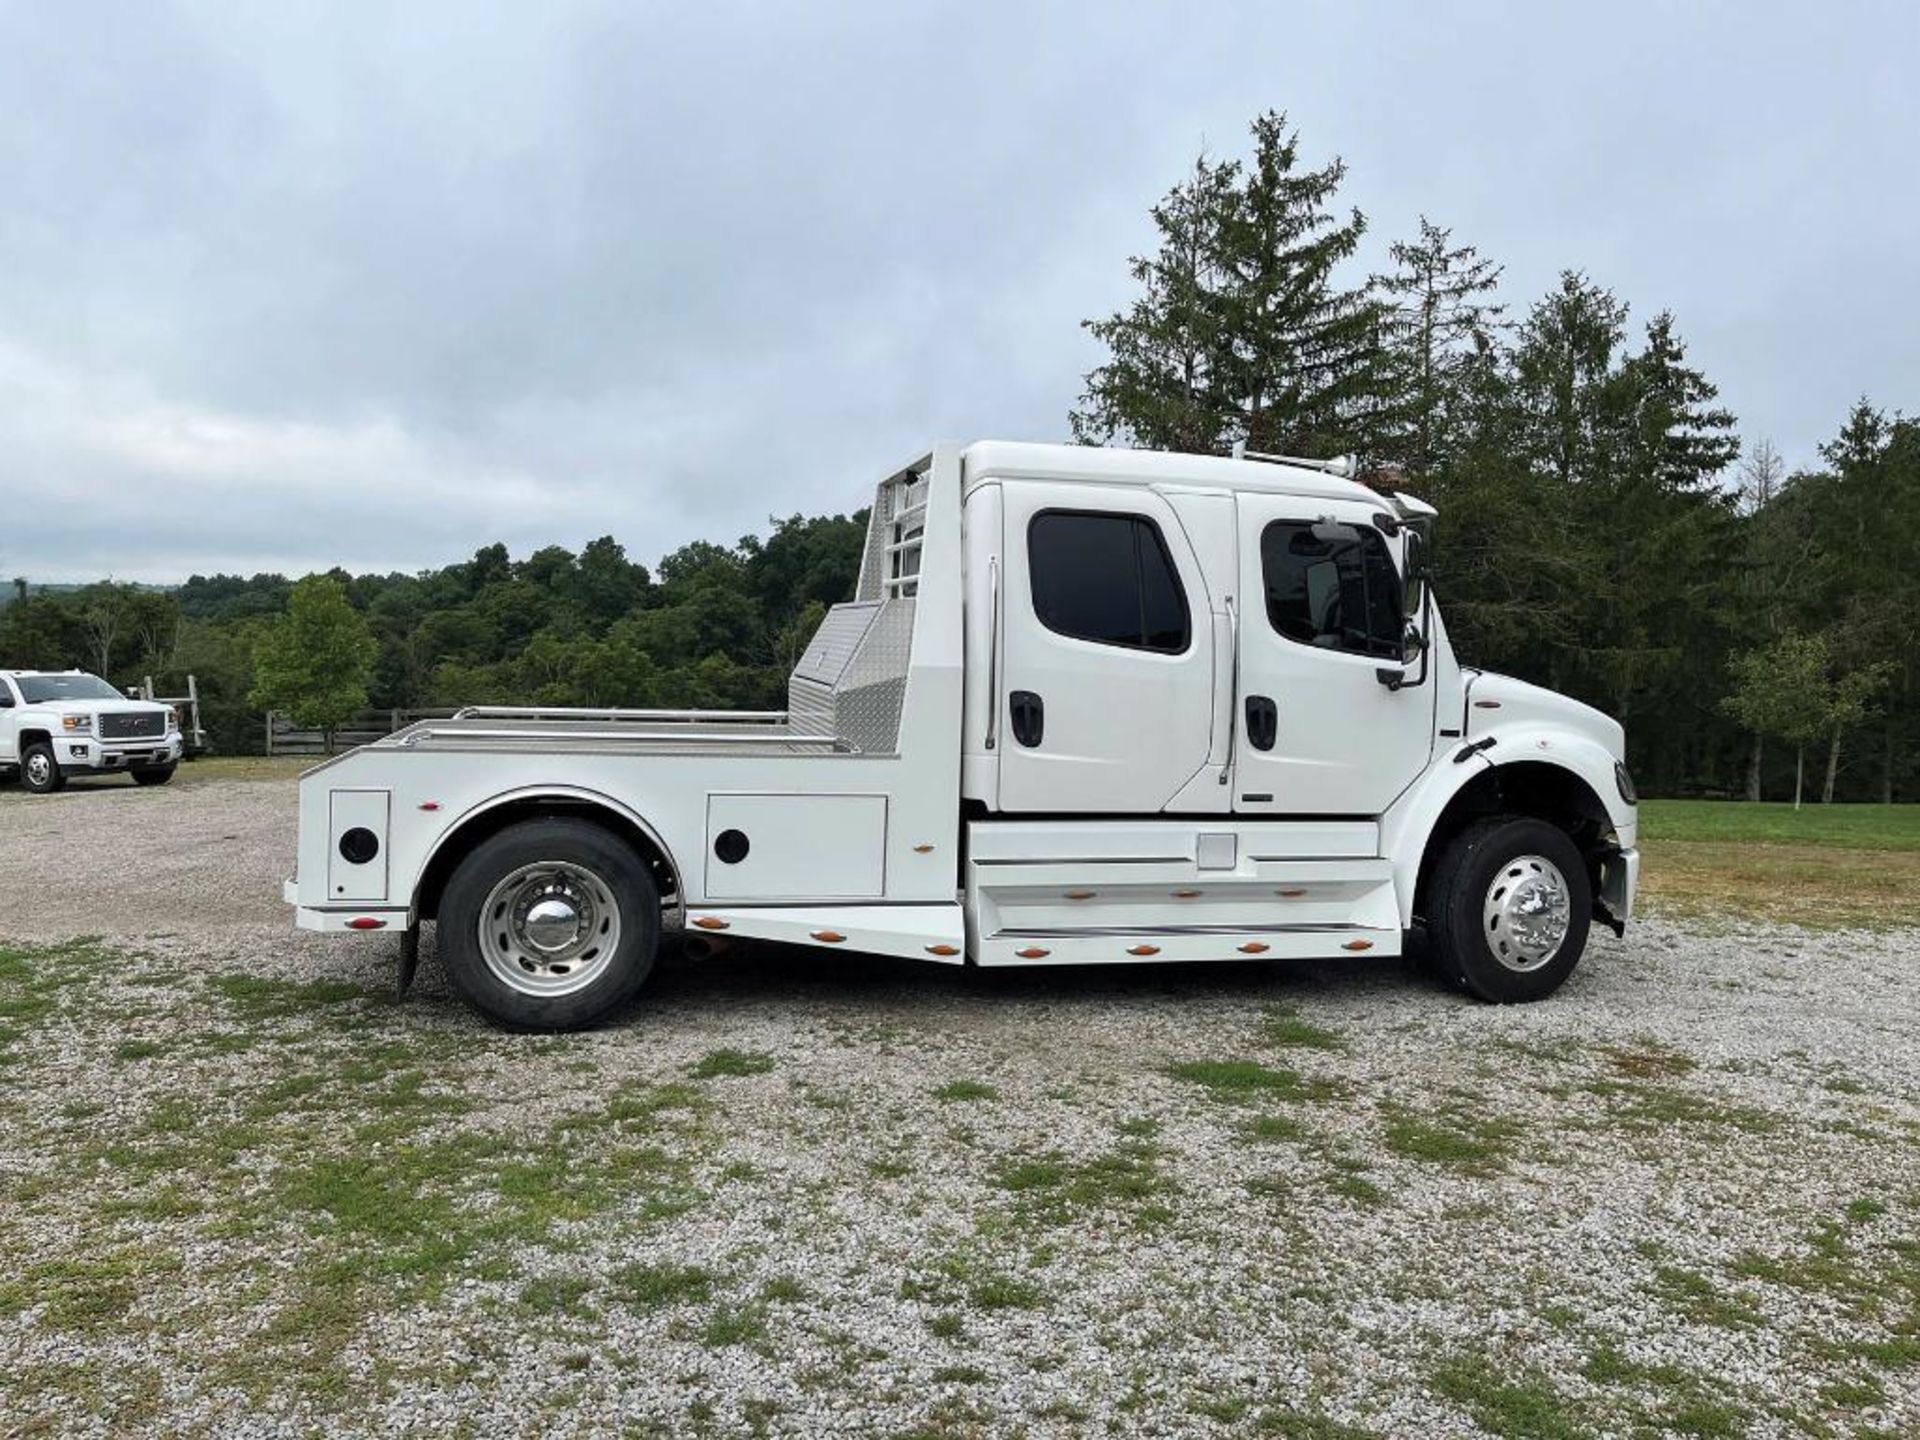 2007 FREIGHTLINER SPORT CHASSIS M2 TRUCK, 330HP MERCEDES DIESEL ENGINE, ALLISON AUTOMATIC TRANSMISSI - Image 4 of 12